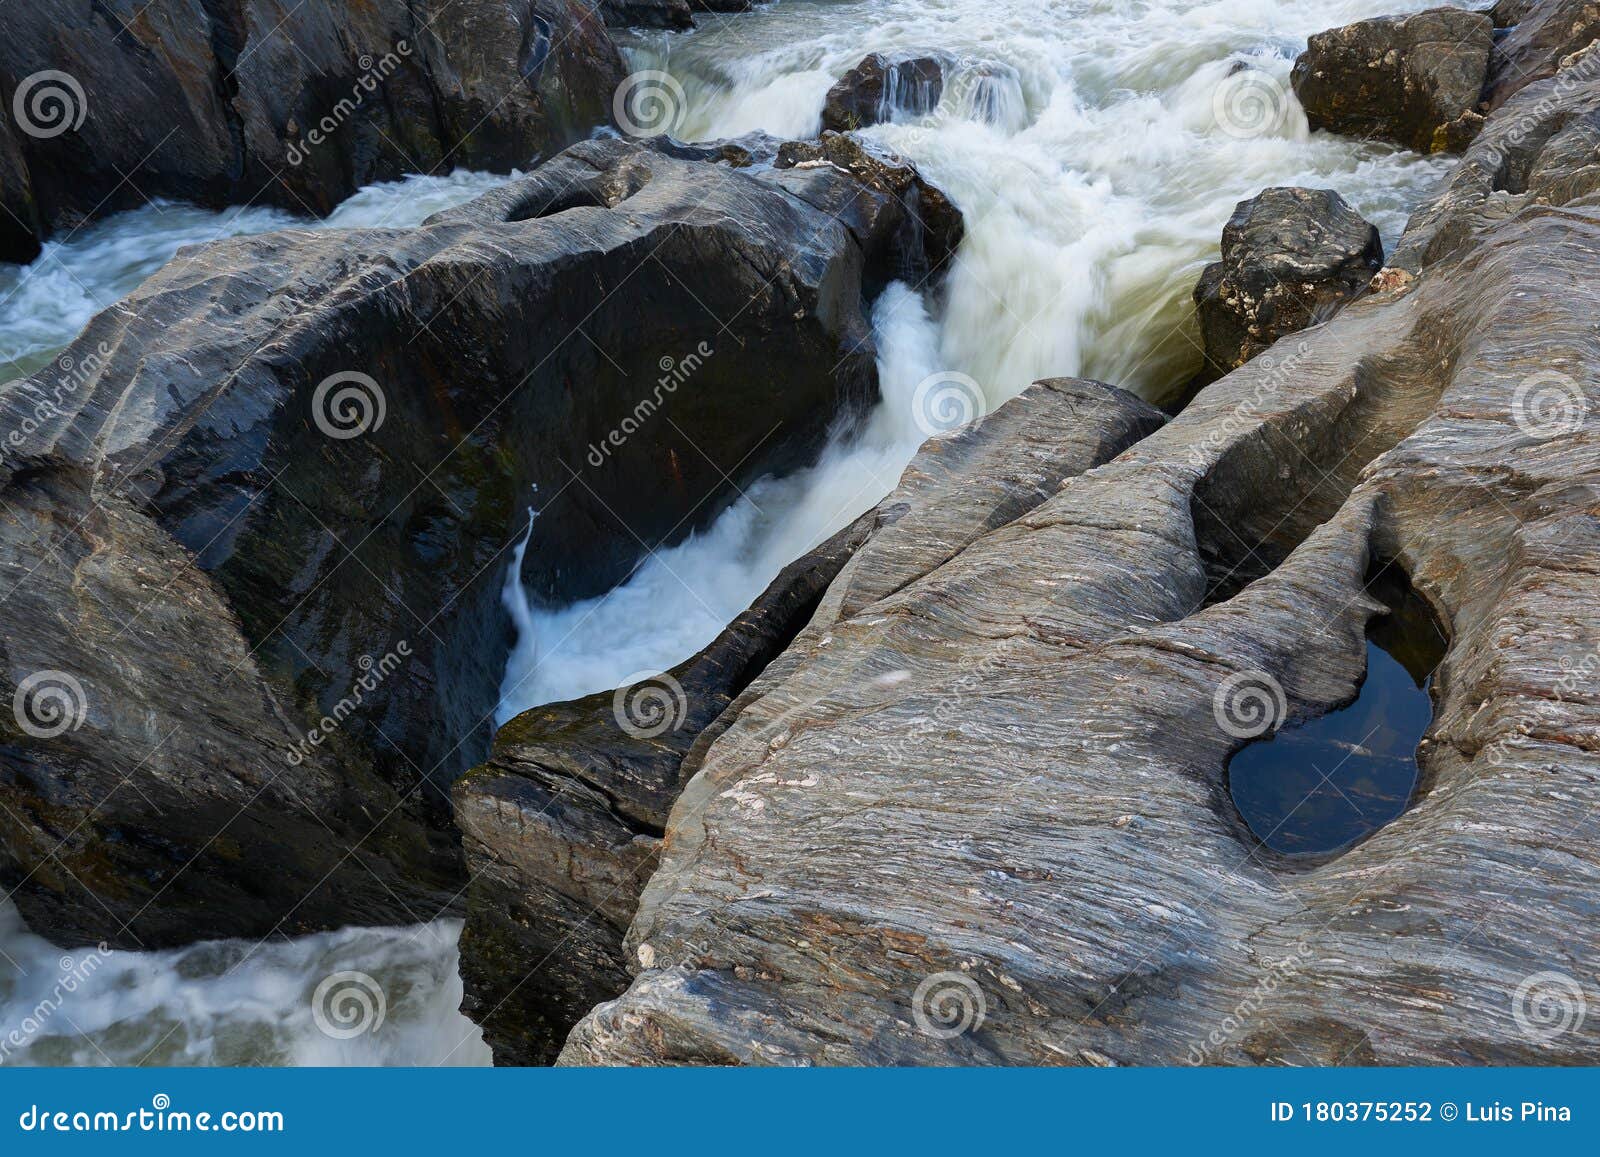 pulo do lobo waterfall with river guadiana and rock details in mertola alentejo, portugal